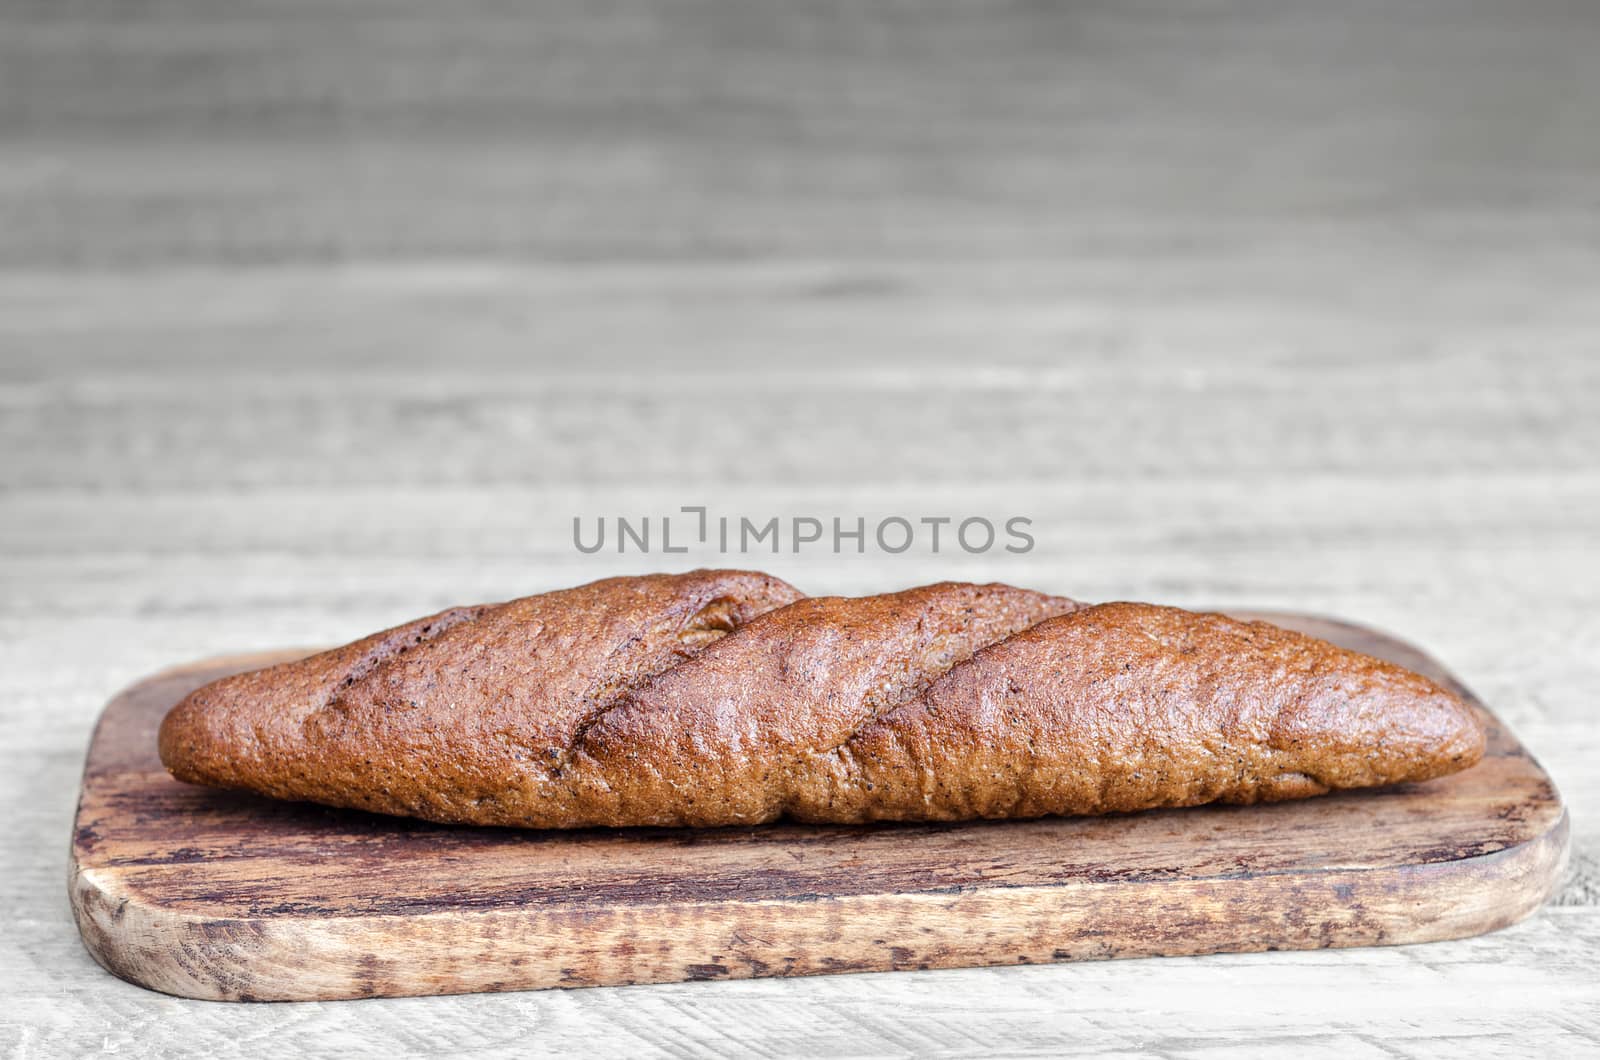 Black bread on the cutting Board, and a gray wooden background